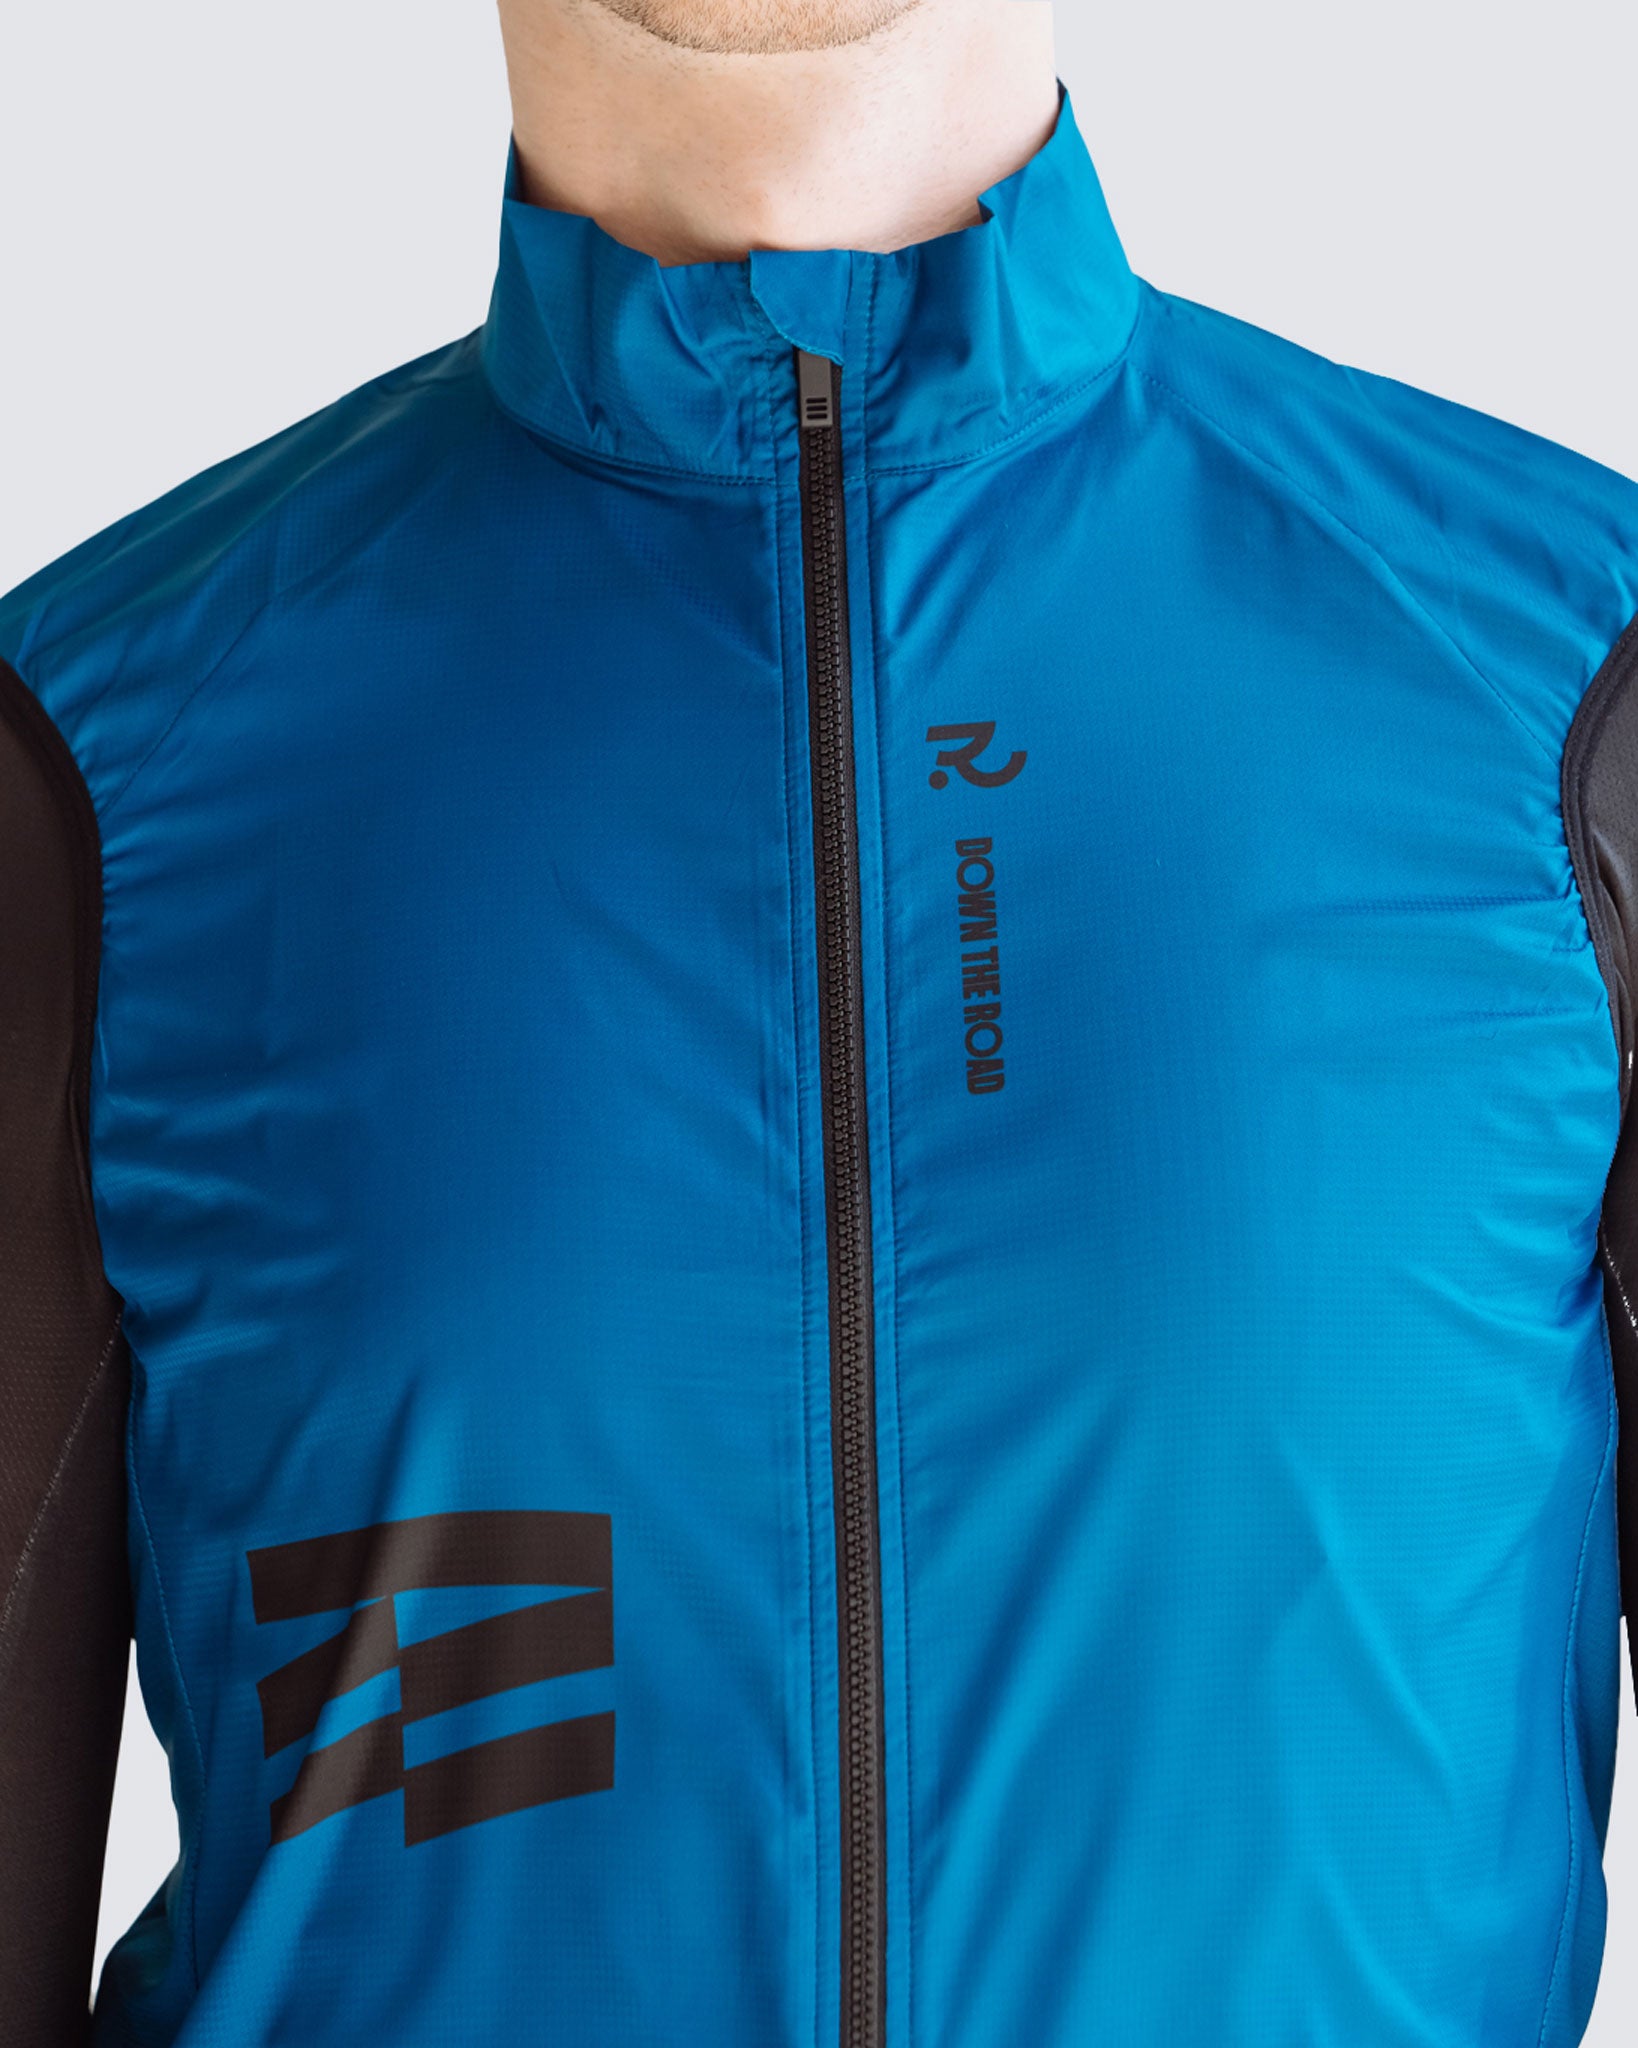 Wavy teal men cycling vest front close up two ways zipper